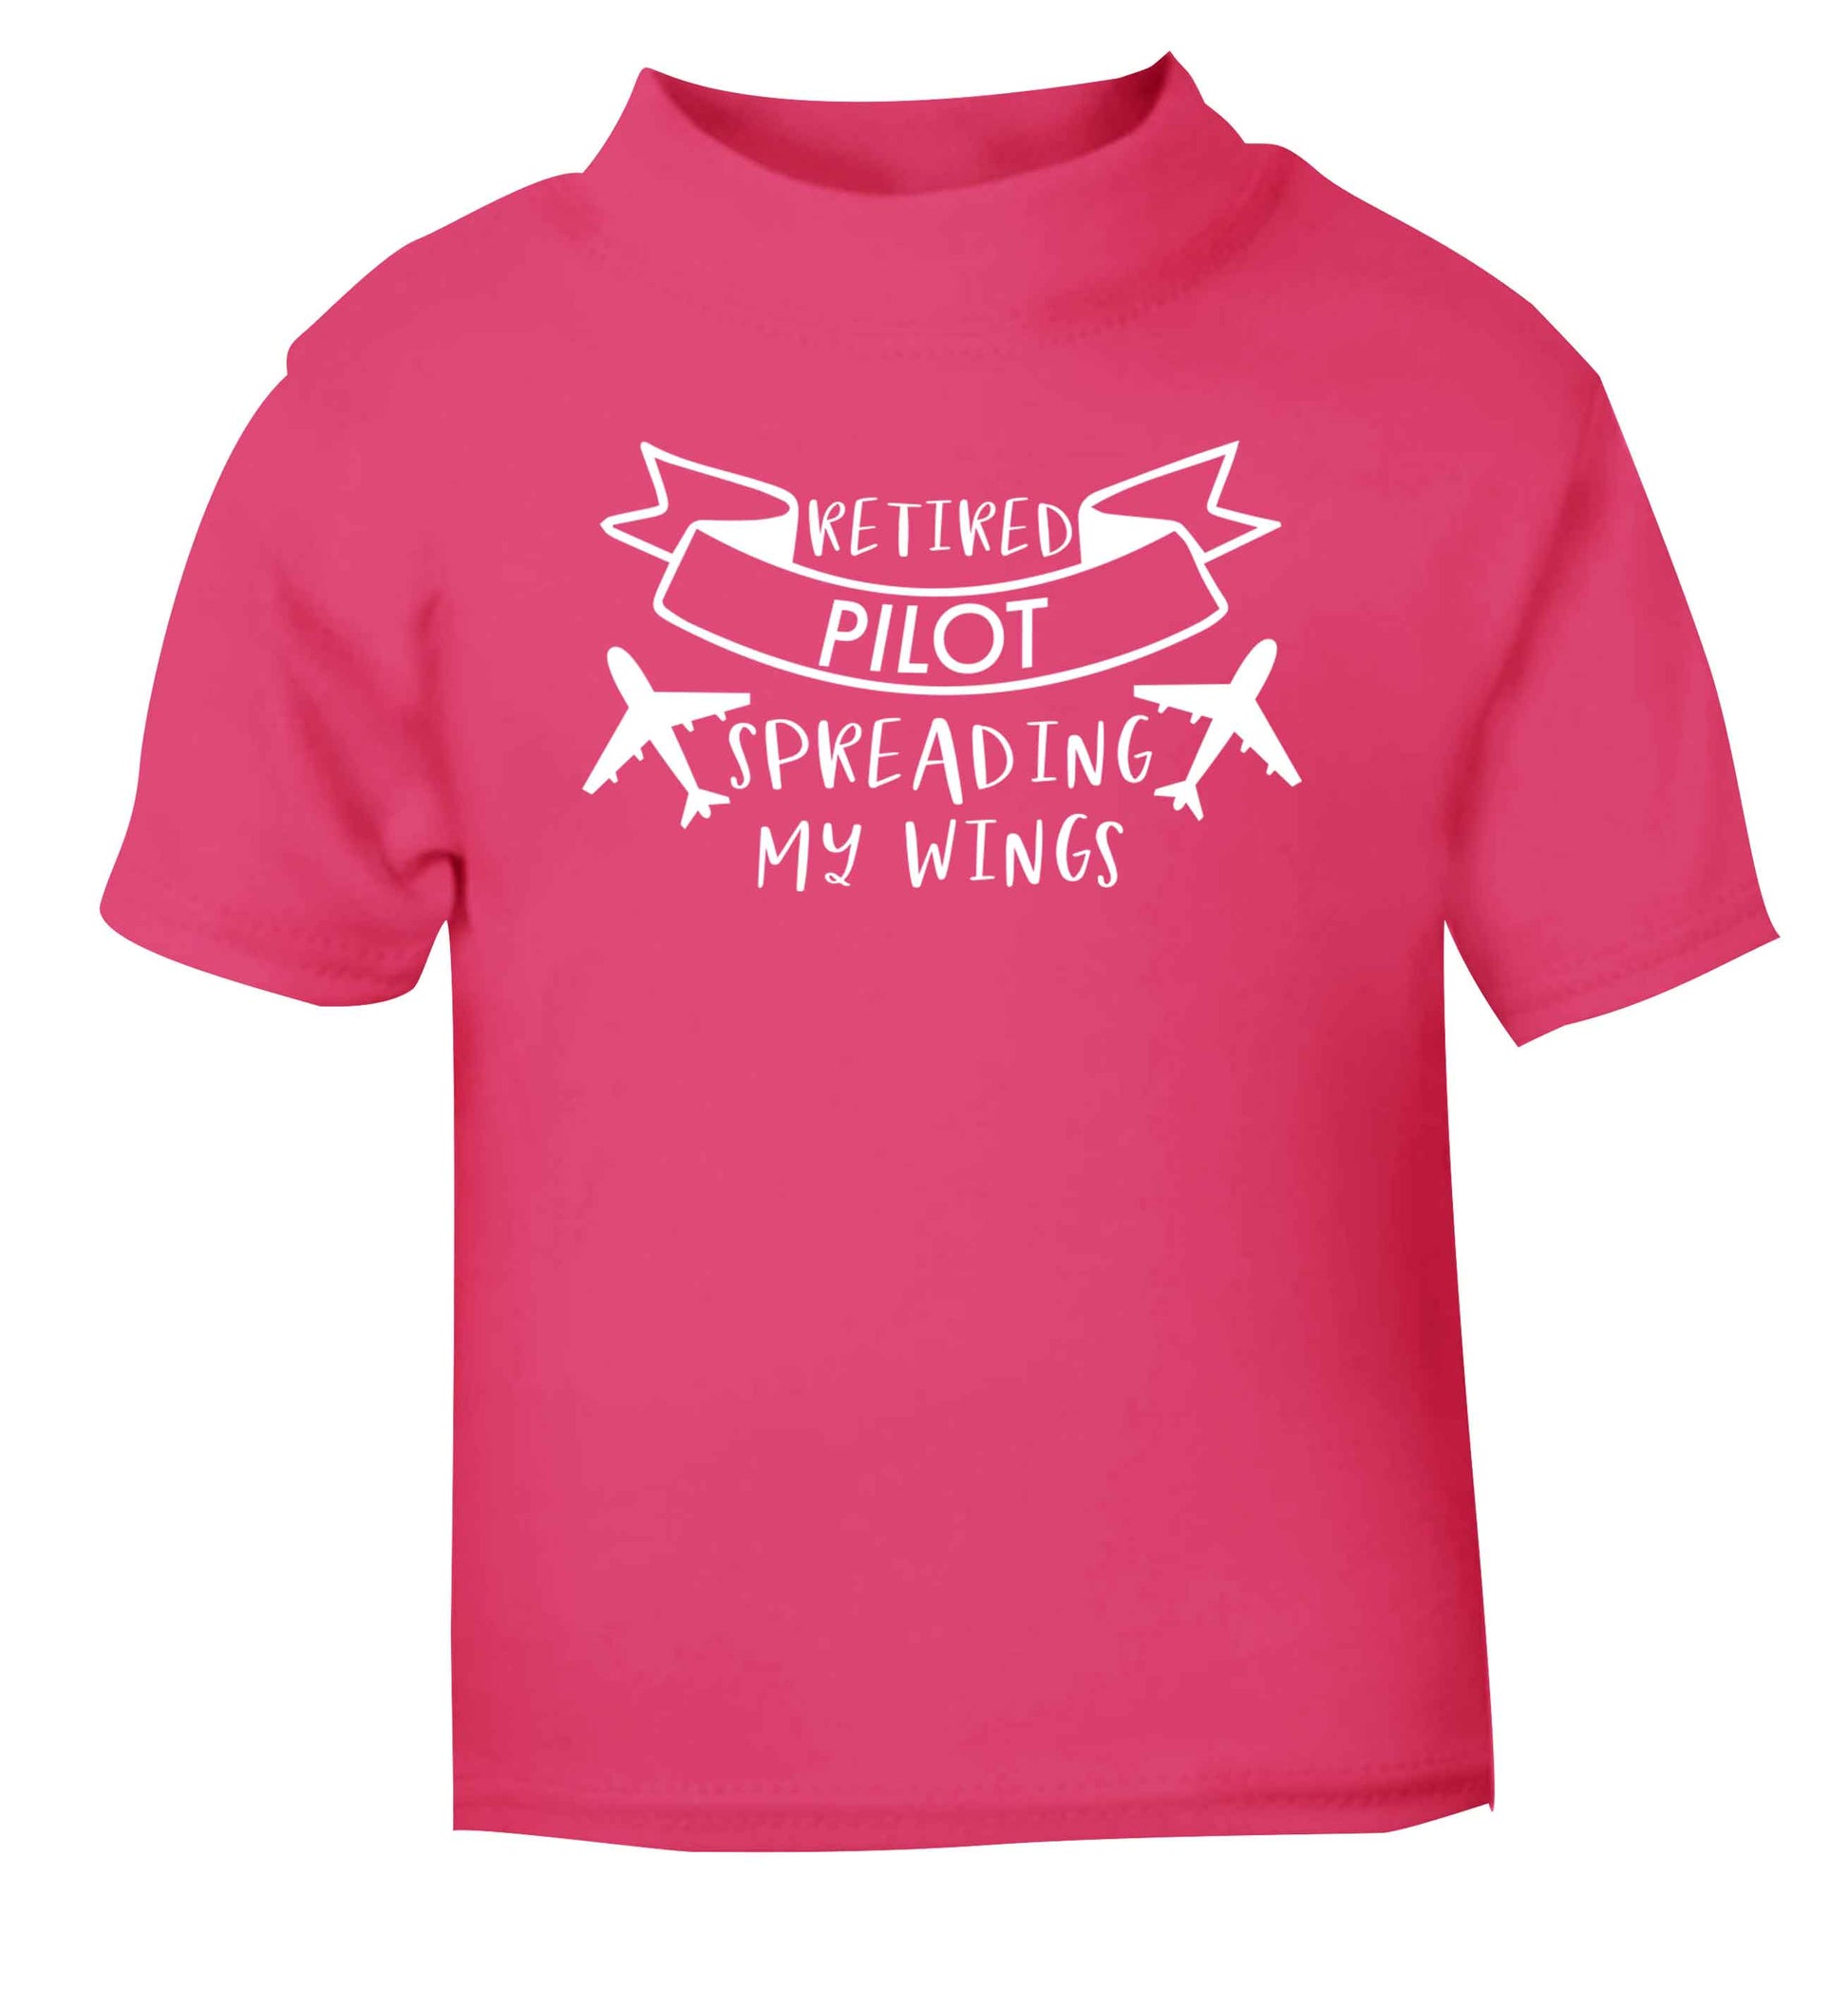 Retired pilot spreading my wings pink Baby Toddler Tshirt 2 Years